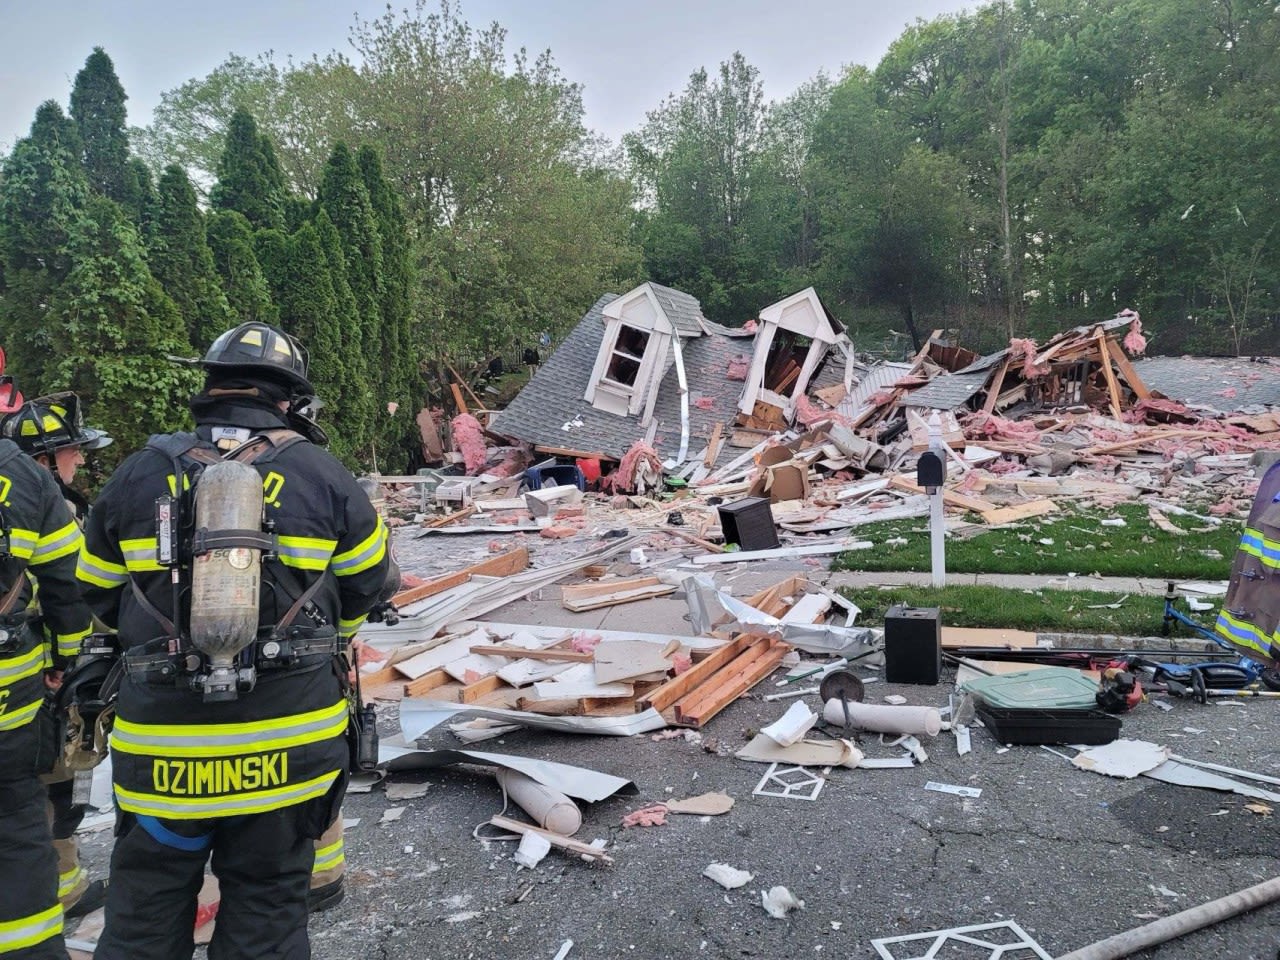 1 dead, 1 injured in New Jersey house explosion: officials